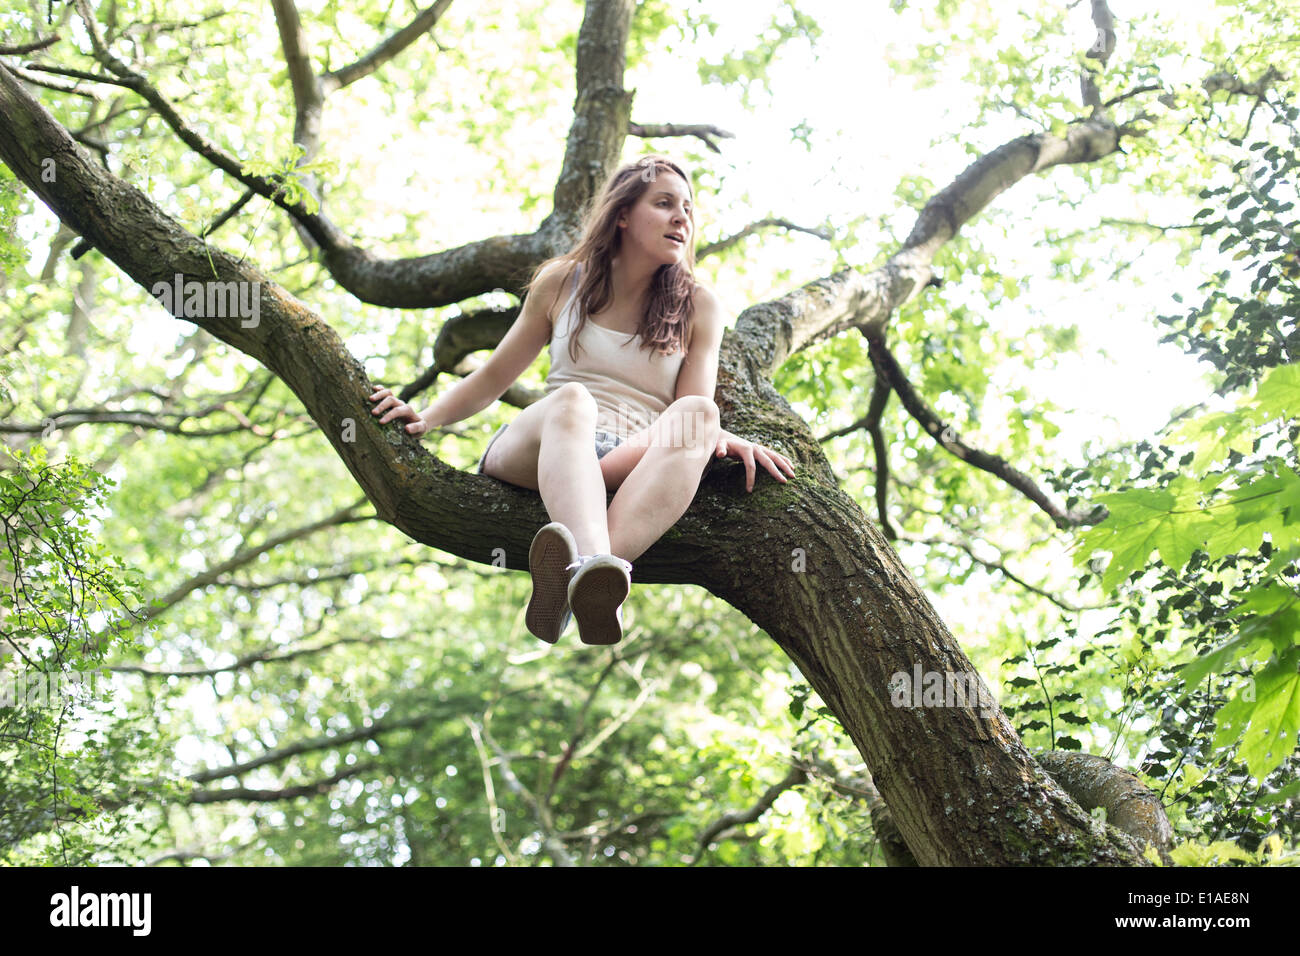 young female sitting in tree wearing white vest and shorts Stock Photo